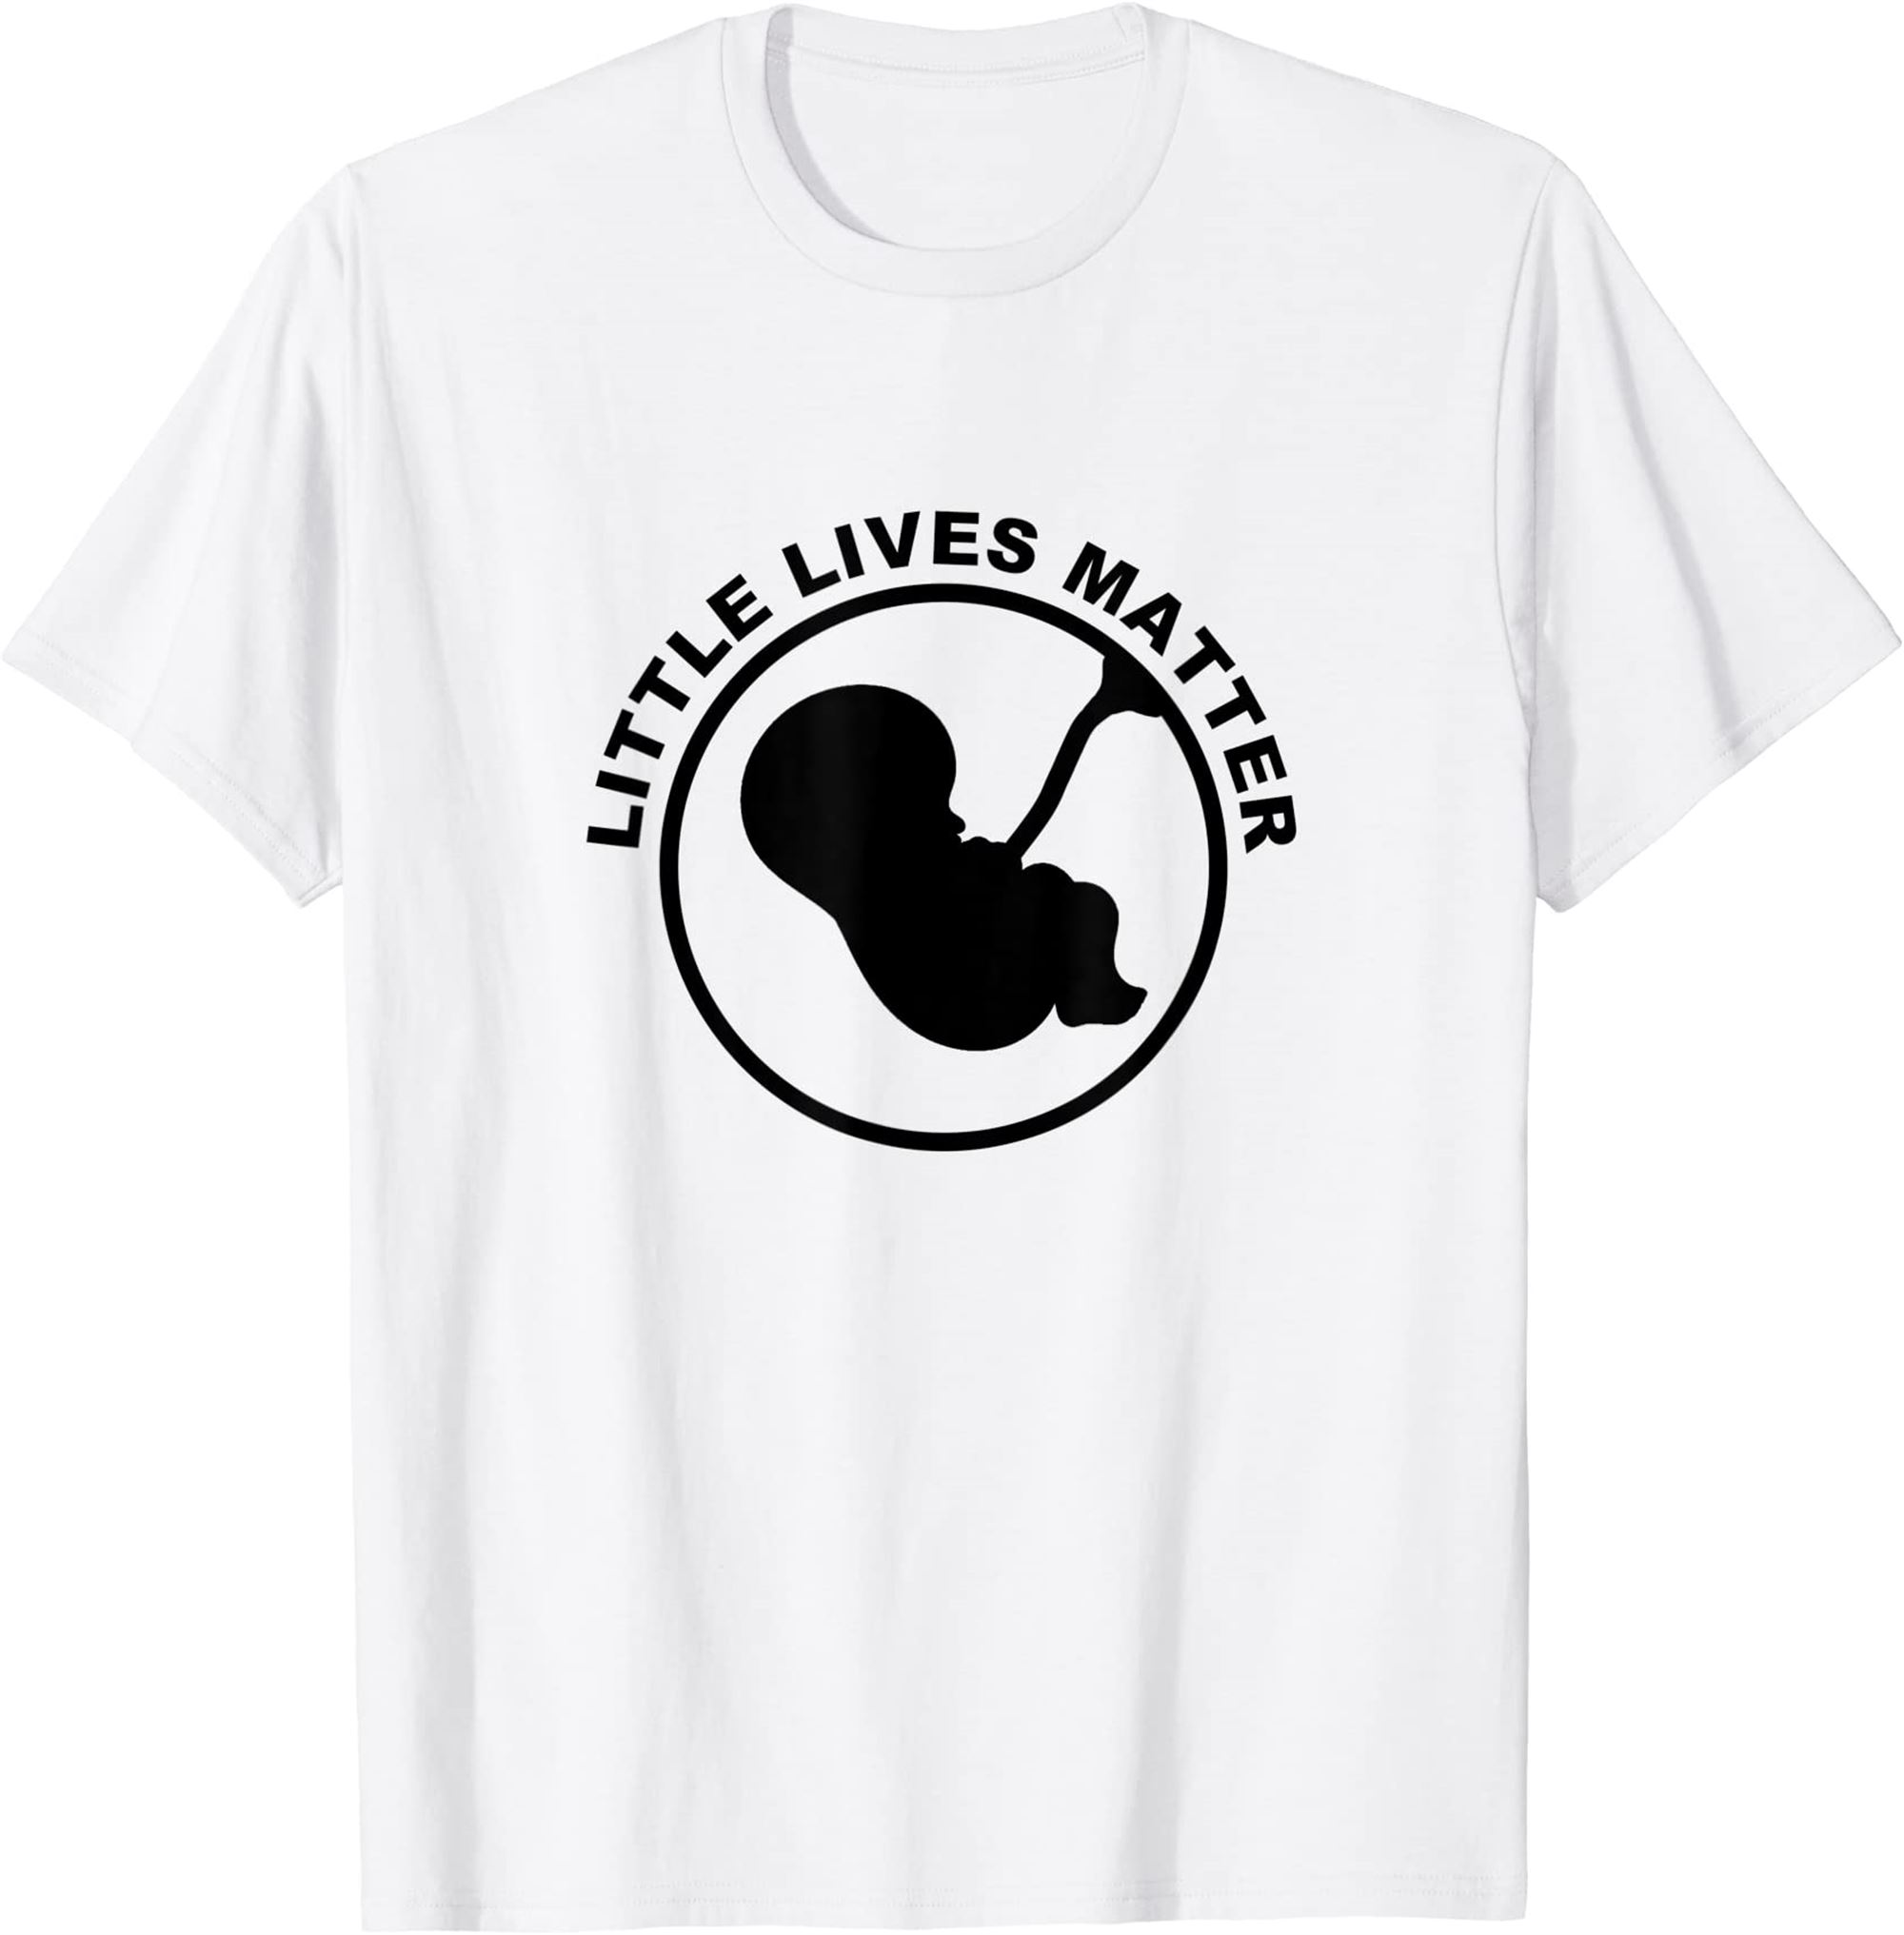 Little Lives Matter Pro Life Anti Abortion T-shirt Full Size Up To 5xl